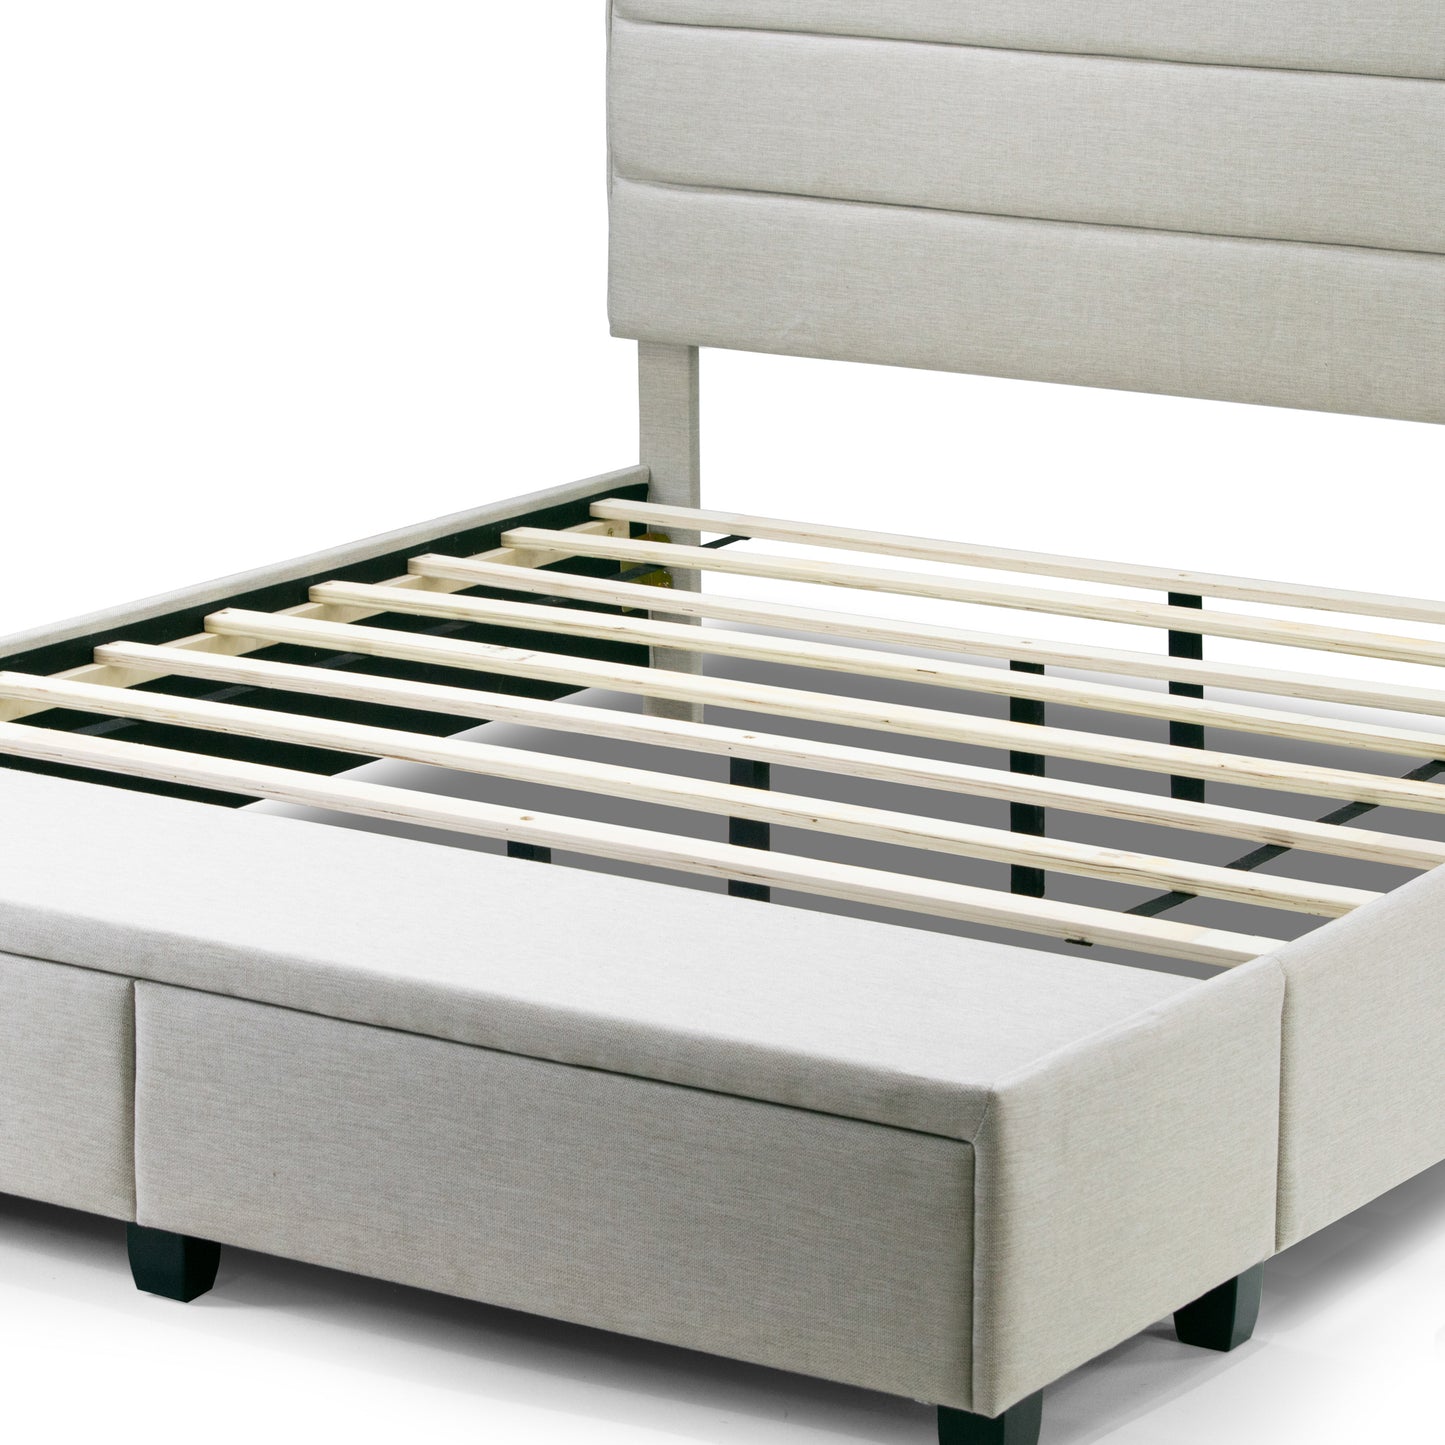 Arnia Beige Fabric King Bed Captain’s Bed with Two Storage Drawers